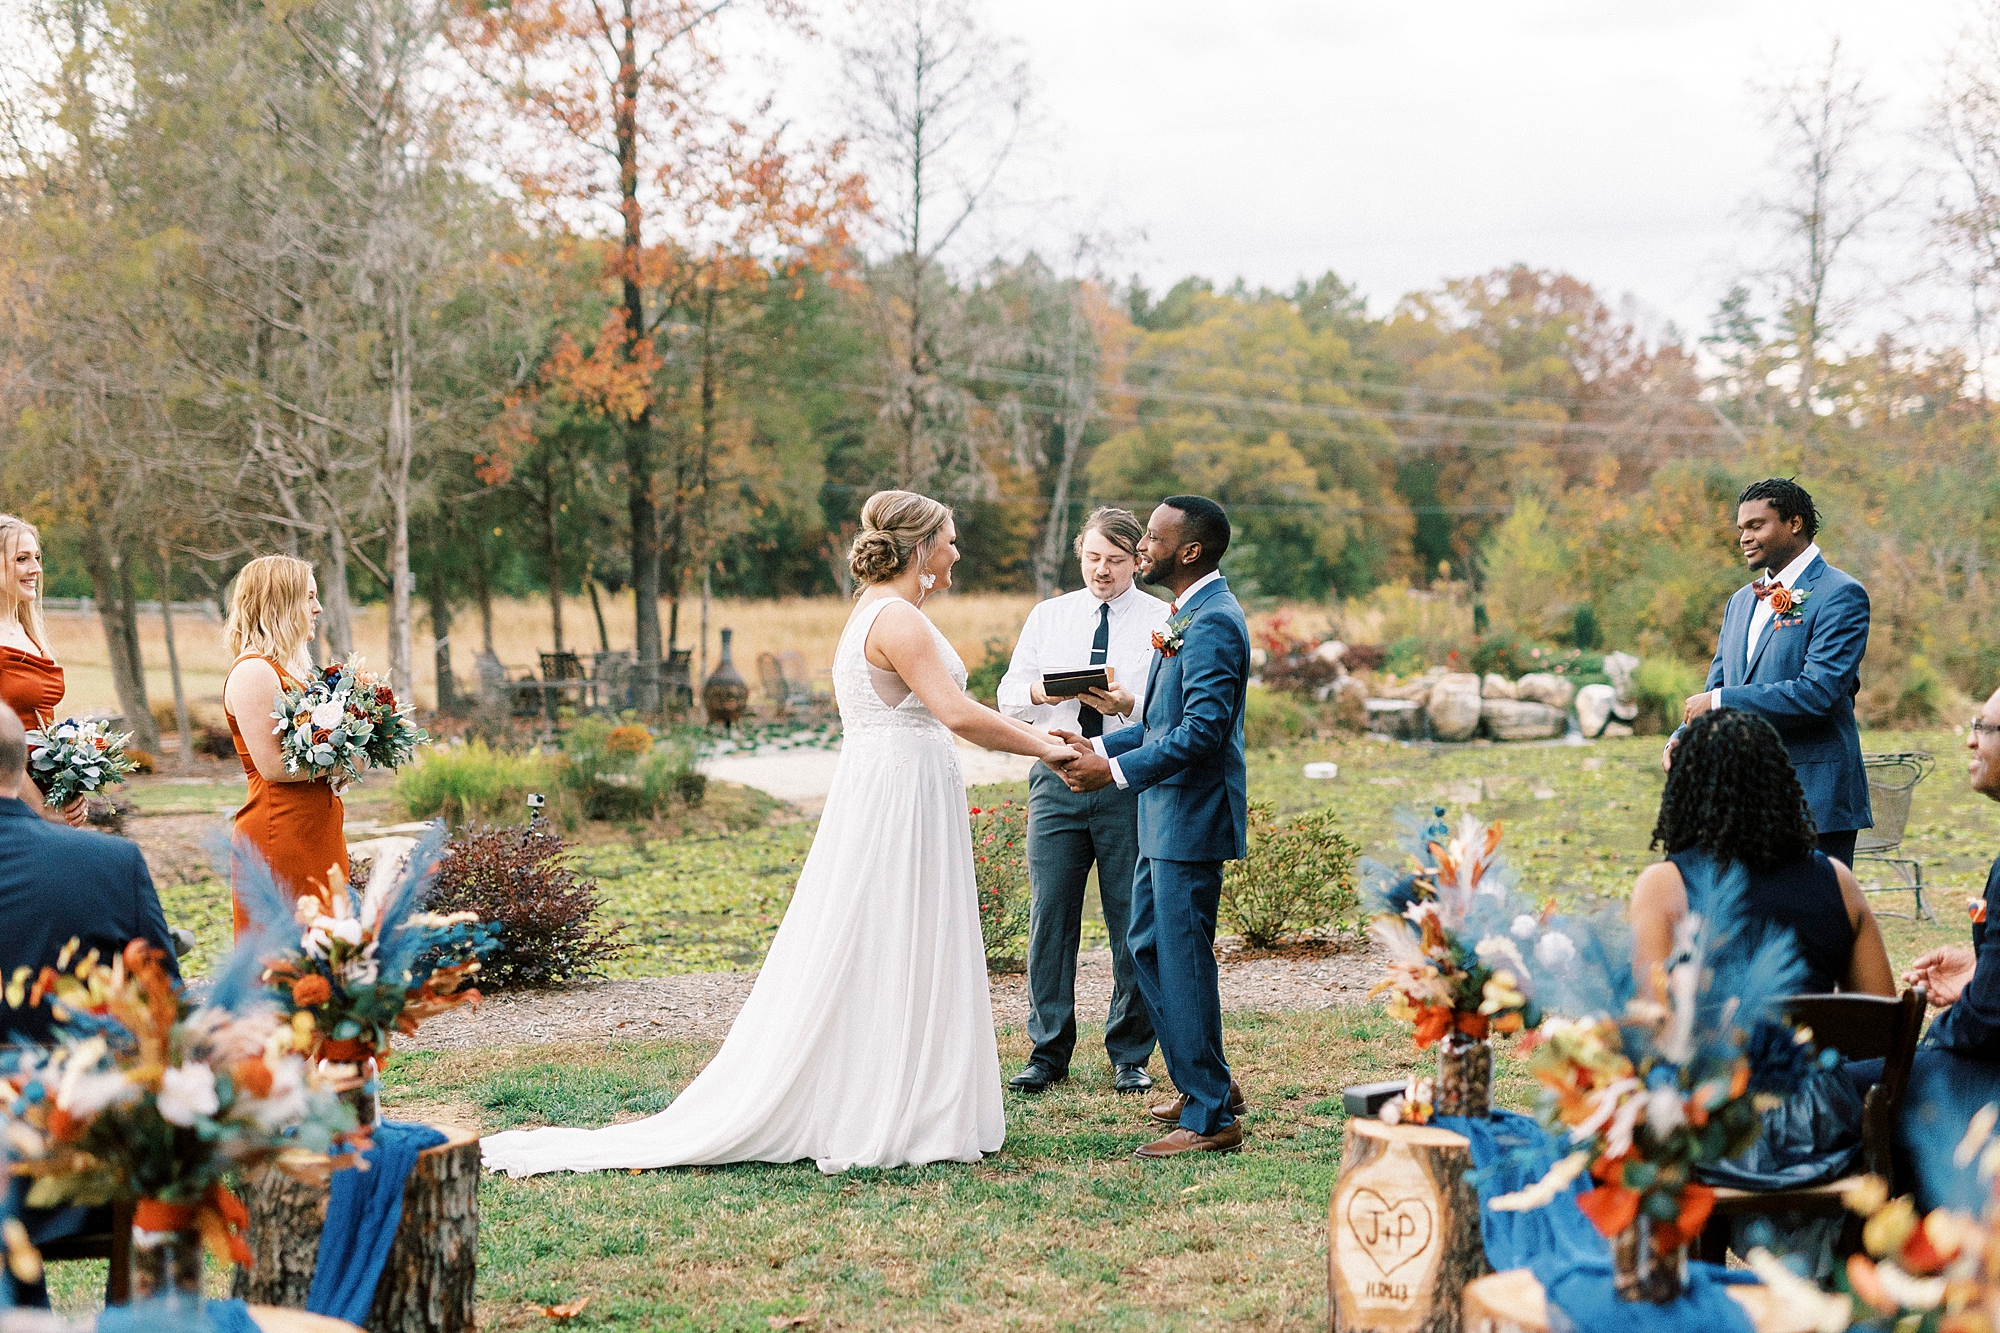 newlyweds hold hands during vows at outdoor wedding ceremony in Indian Trail, NC